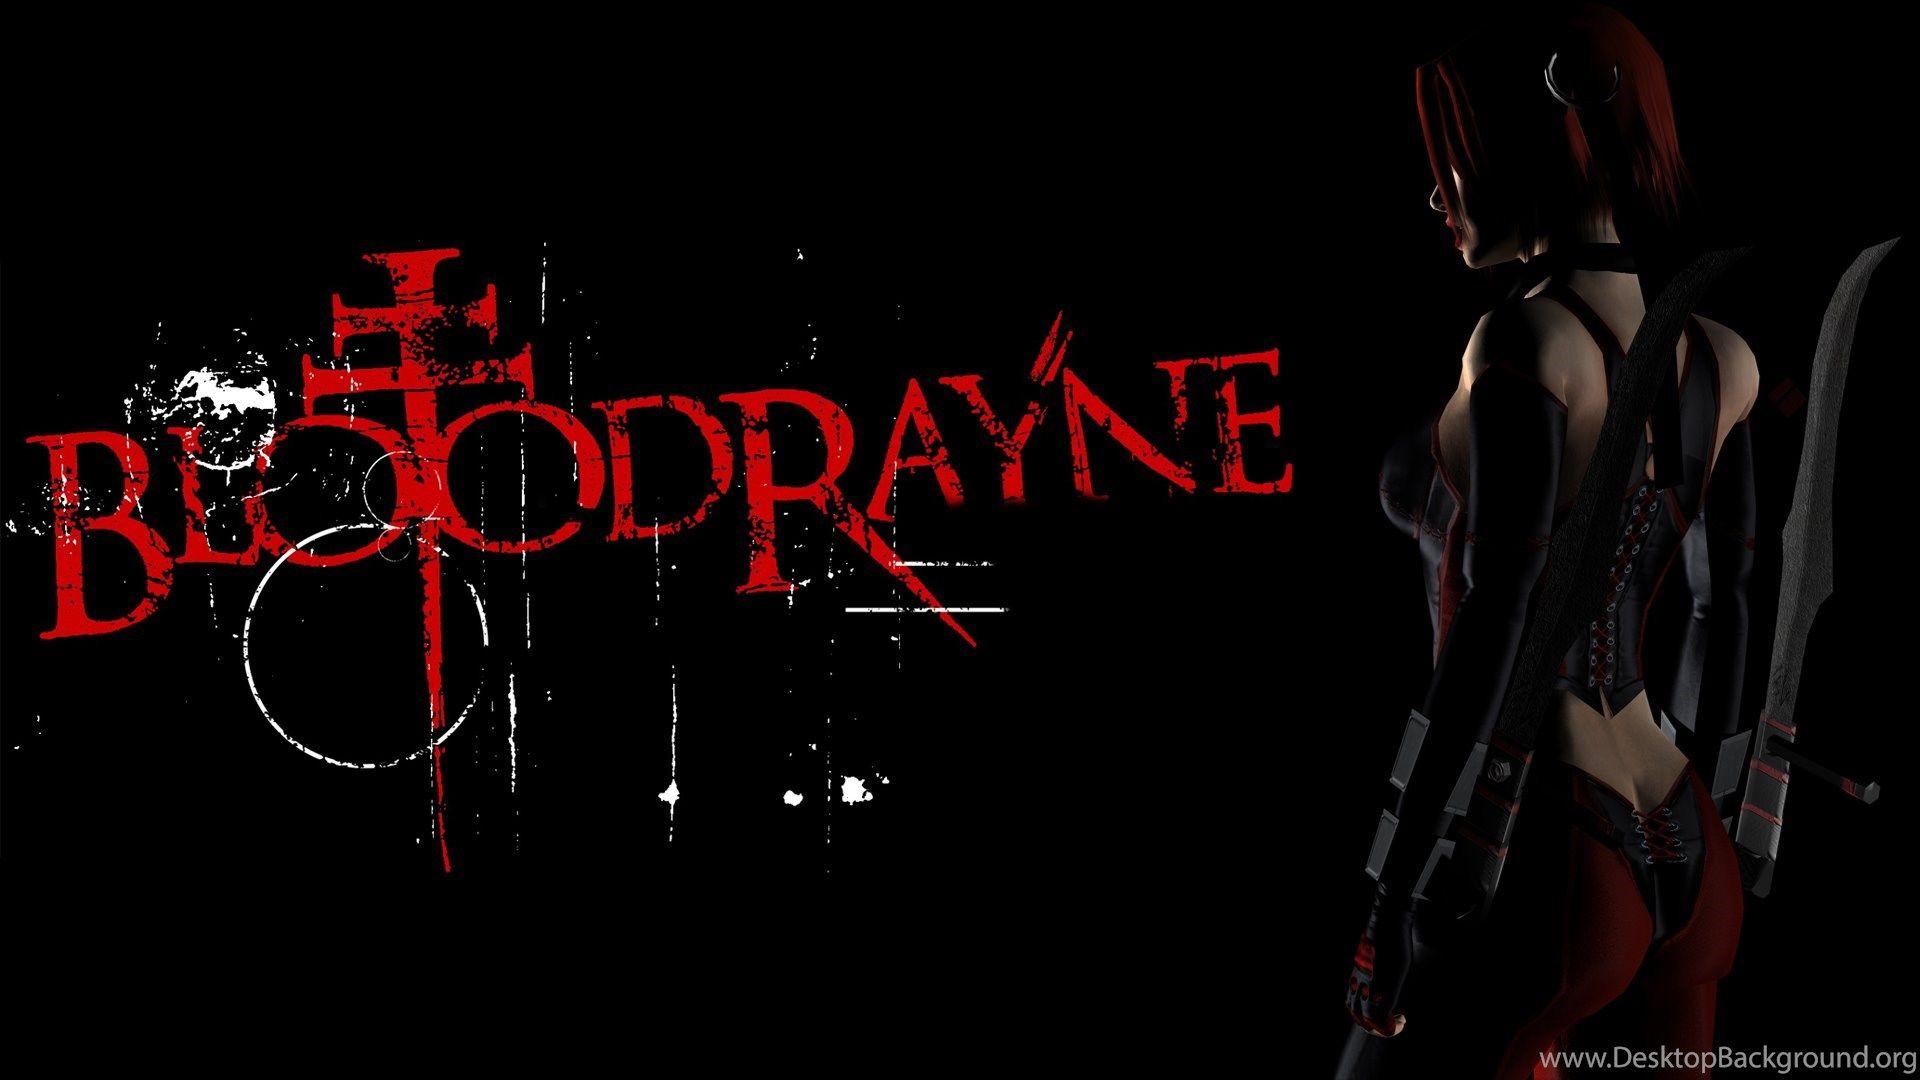 Bloodrayne 1080P 2k 4k Full HD Wallpapers Backgrounds Free Download   Wallpaper Crafter